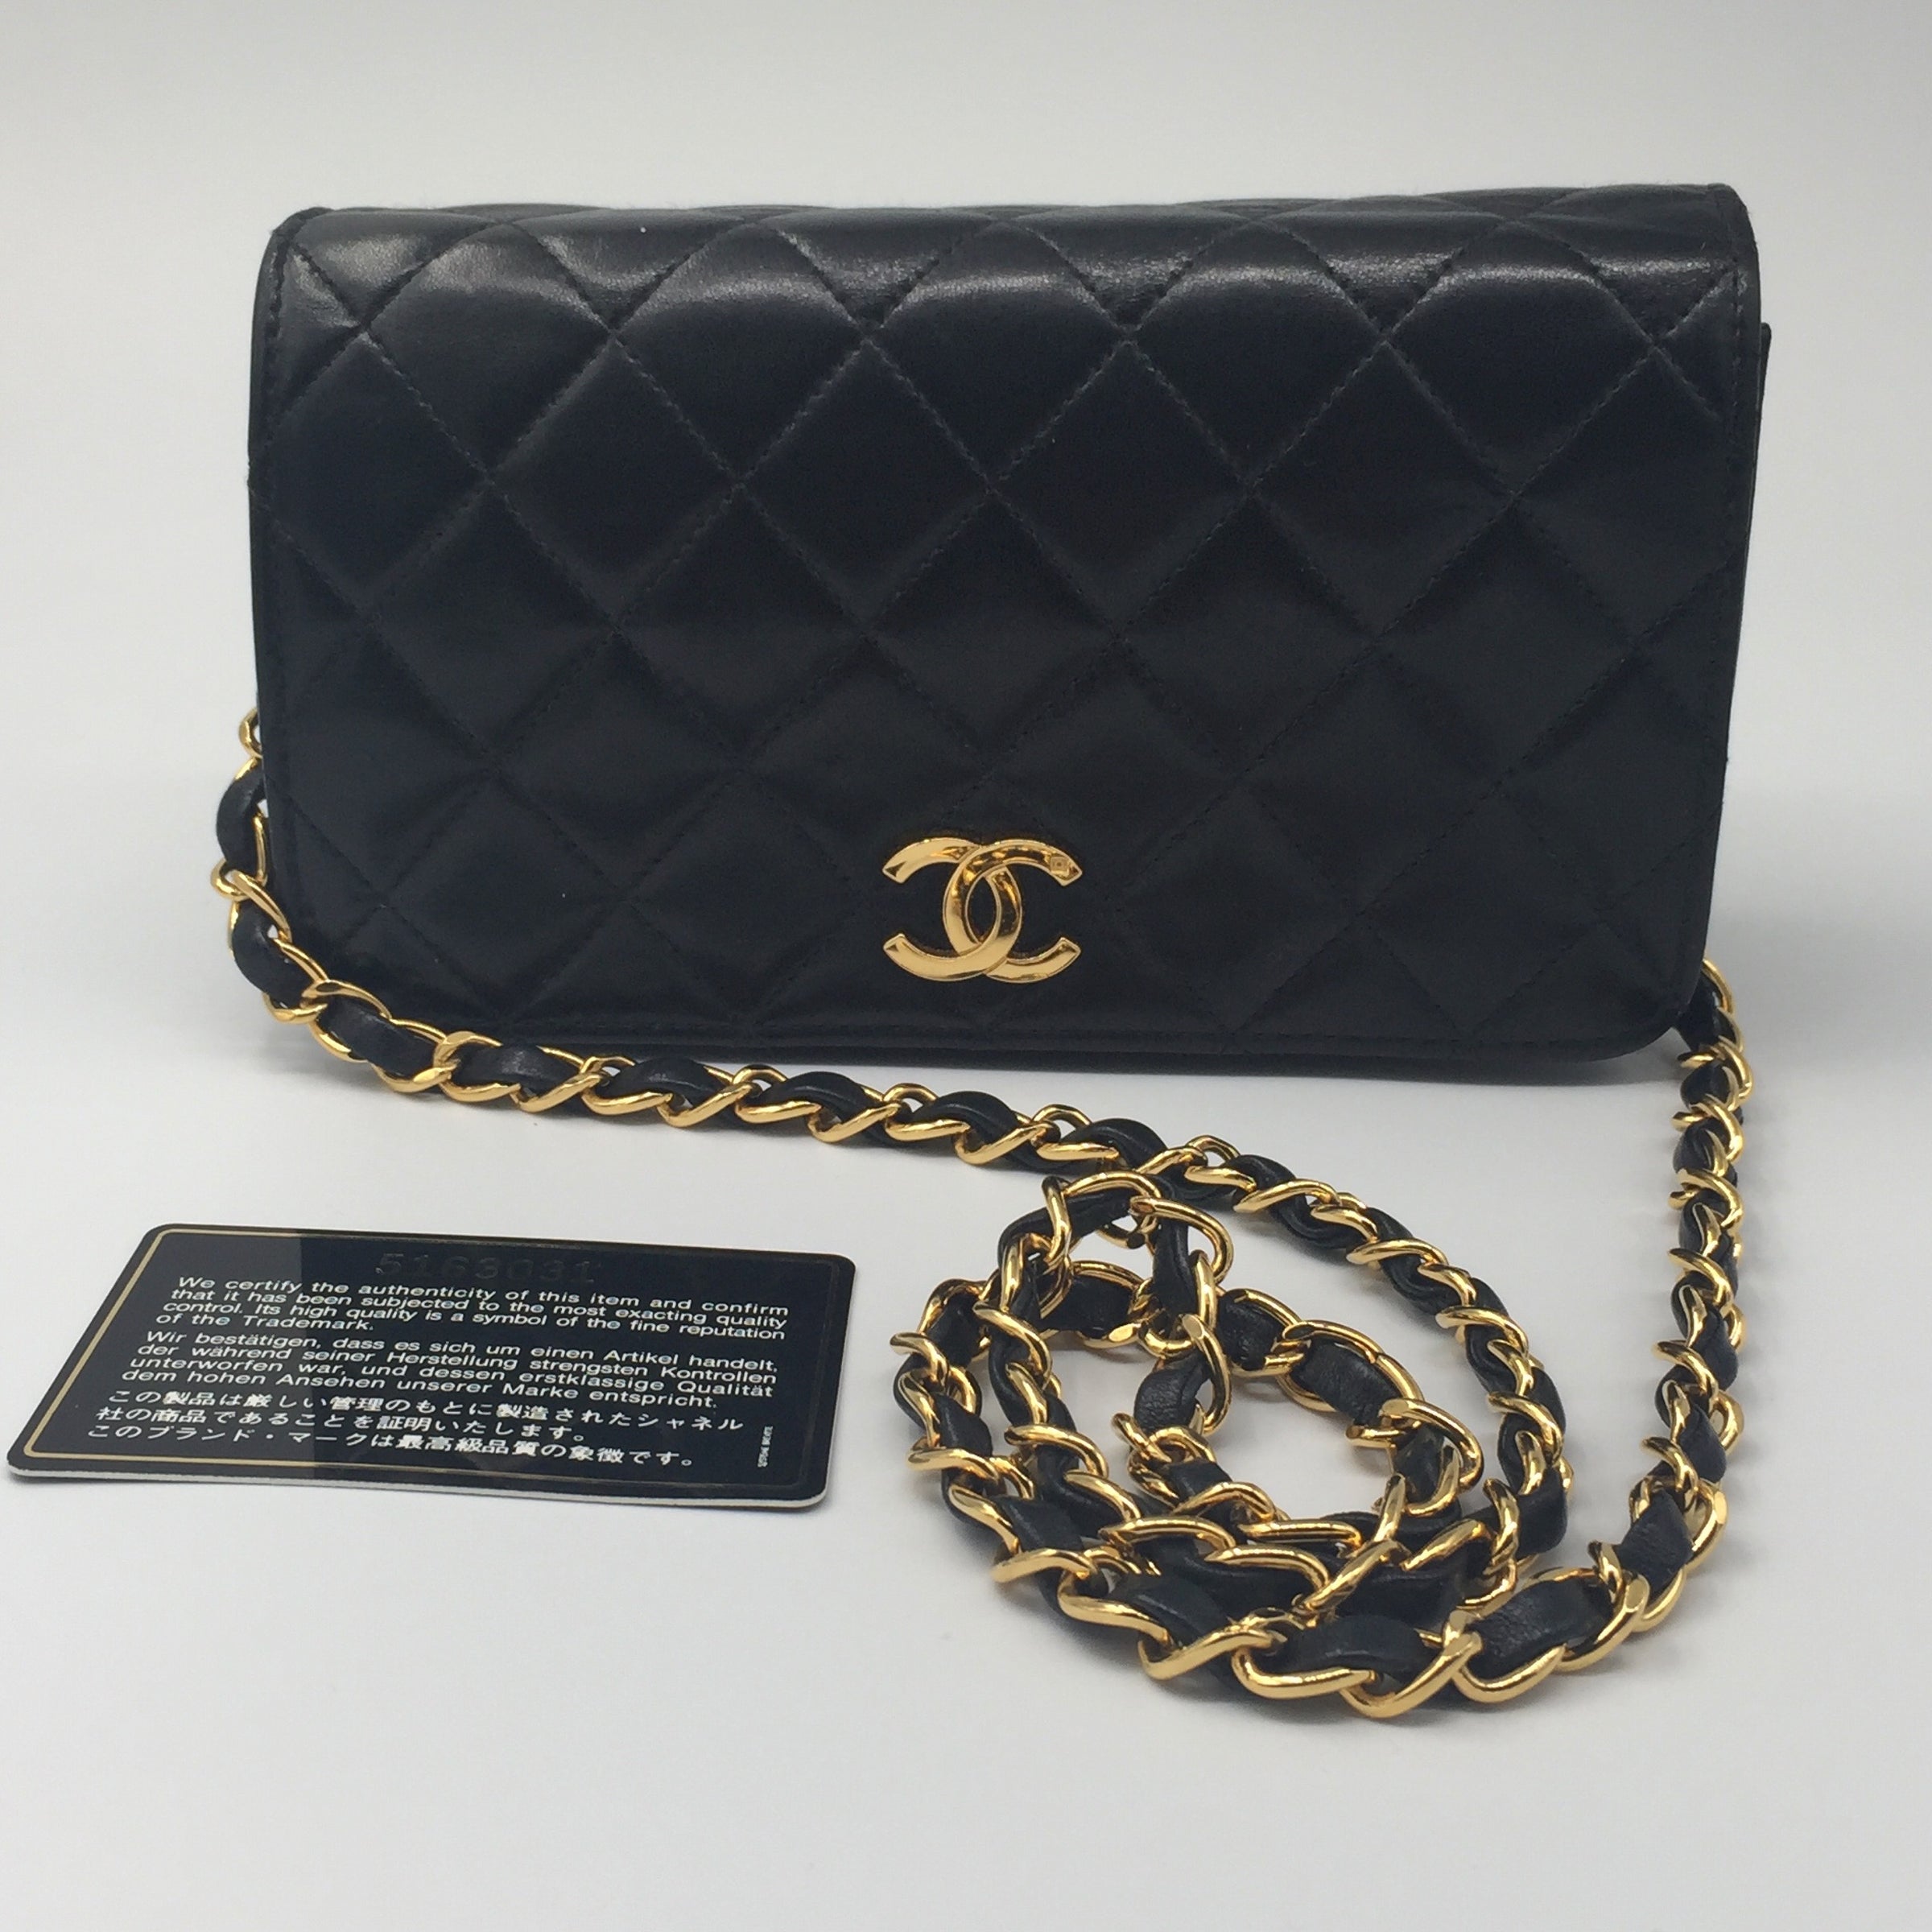 Chanel 22S Black Multicolor Lambskin Fixation Small Chanel 19 Bag - Handbag | Pre-owned & Certified | used Second Hand | Unisex